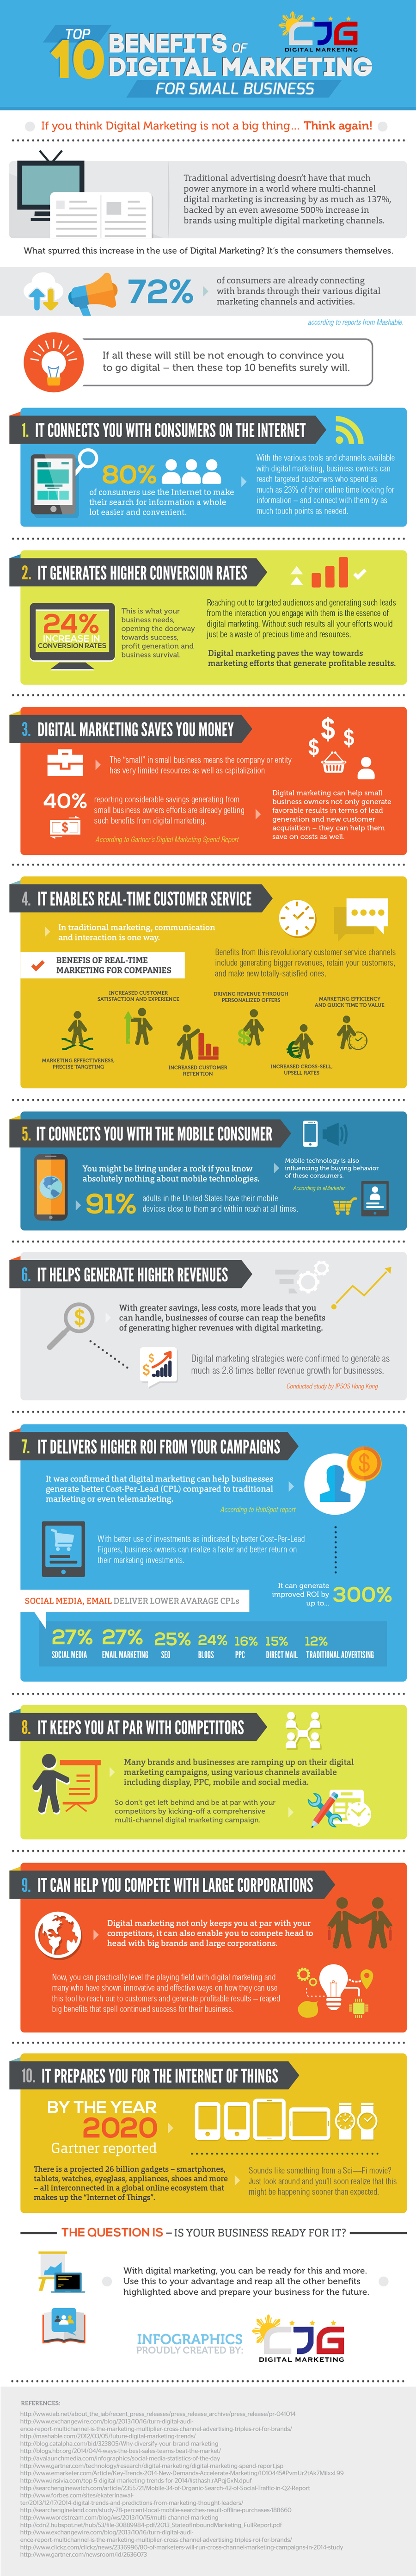 Top_10_Benefits_of_Digital_Marketing_for_Small_Business